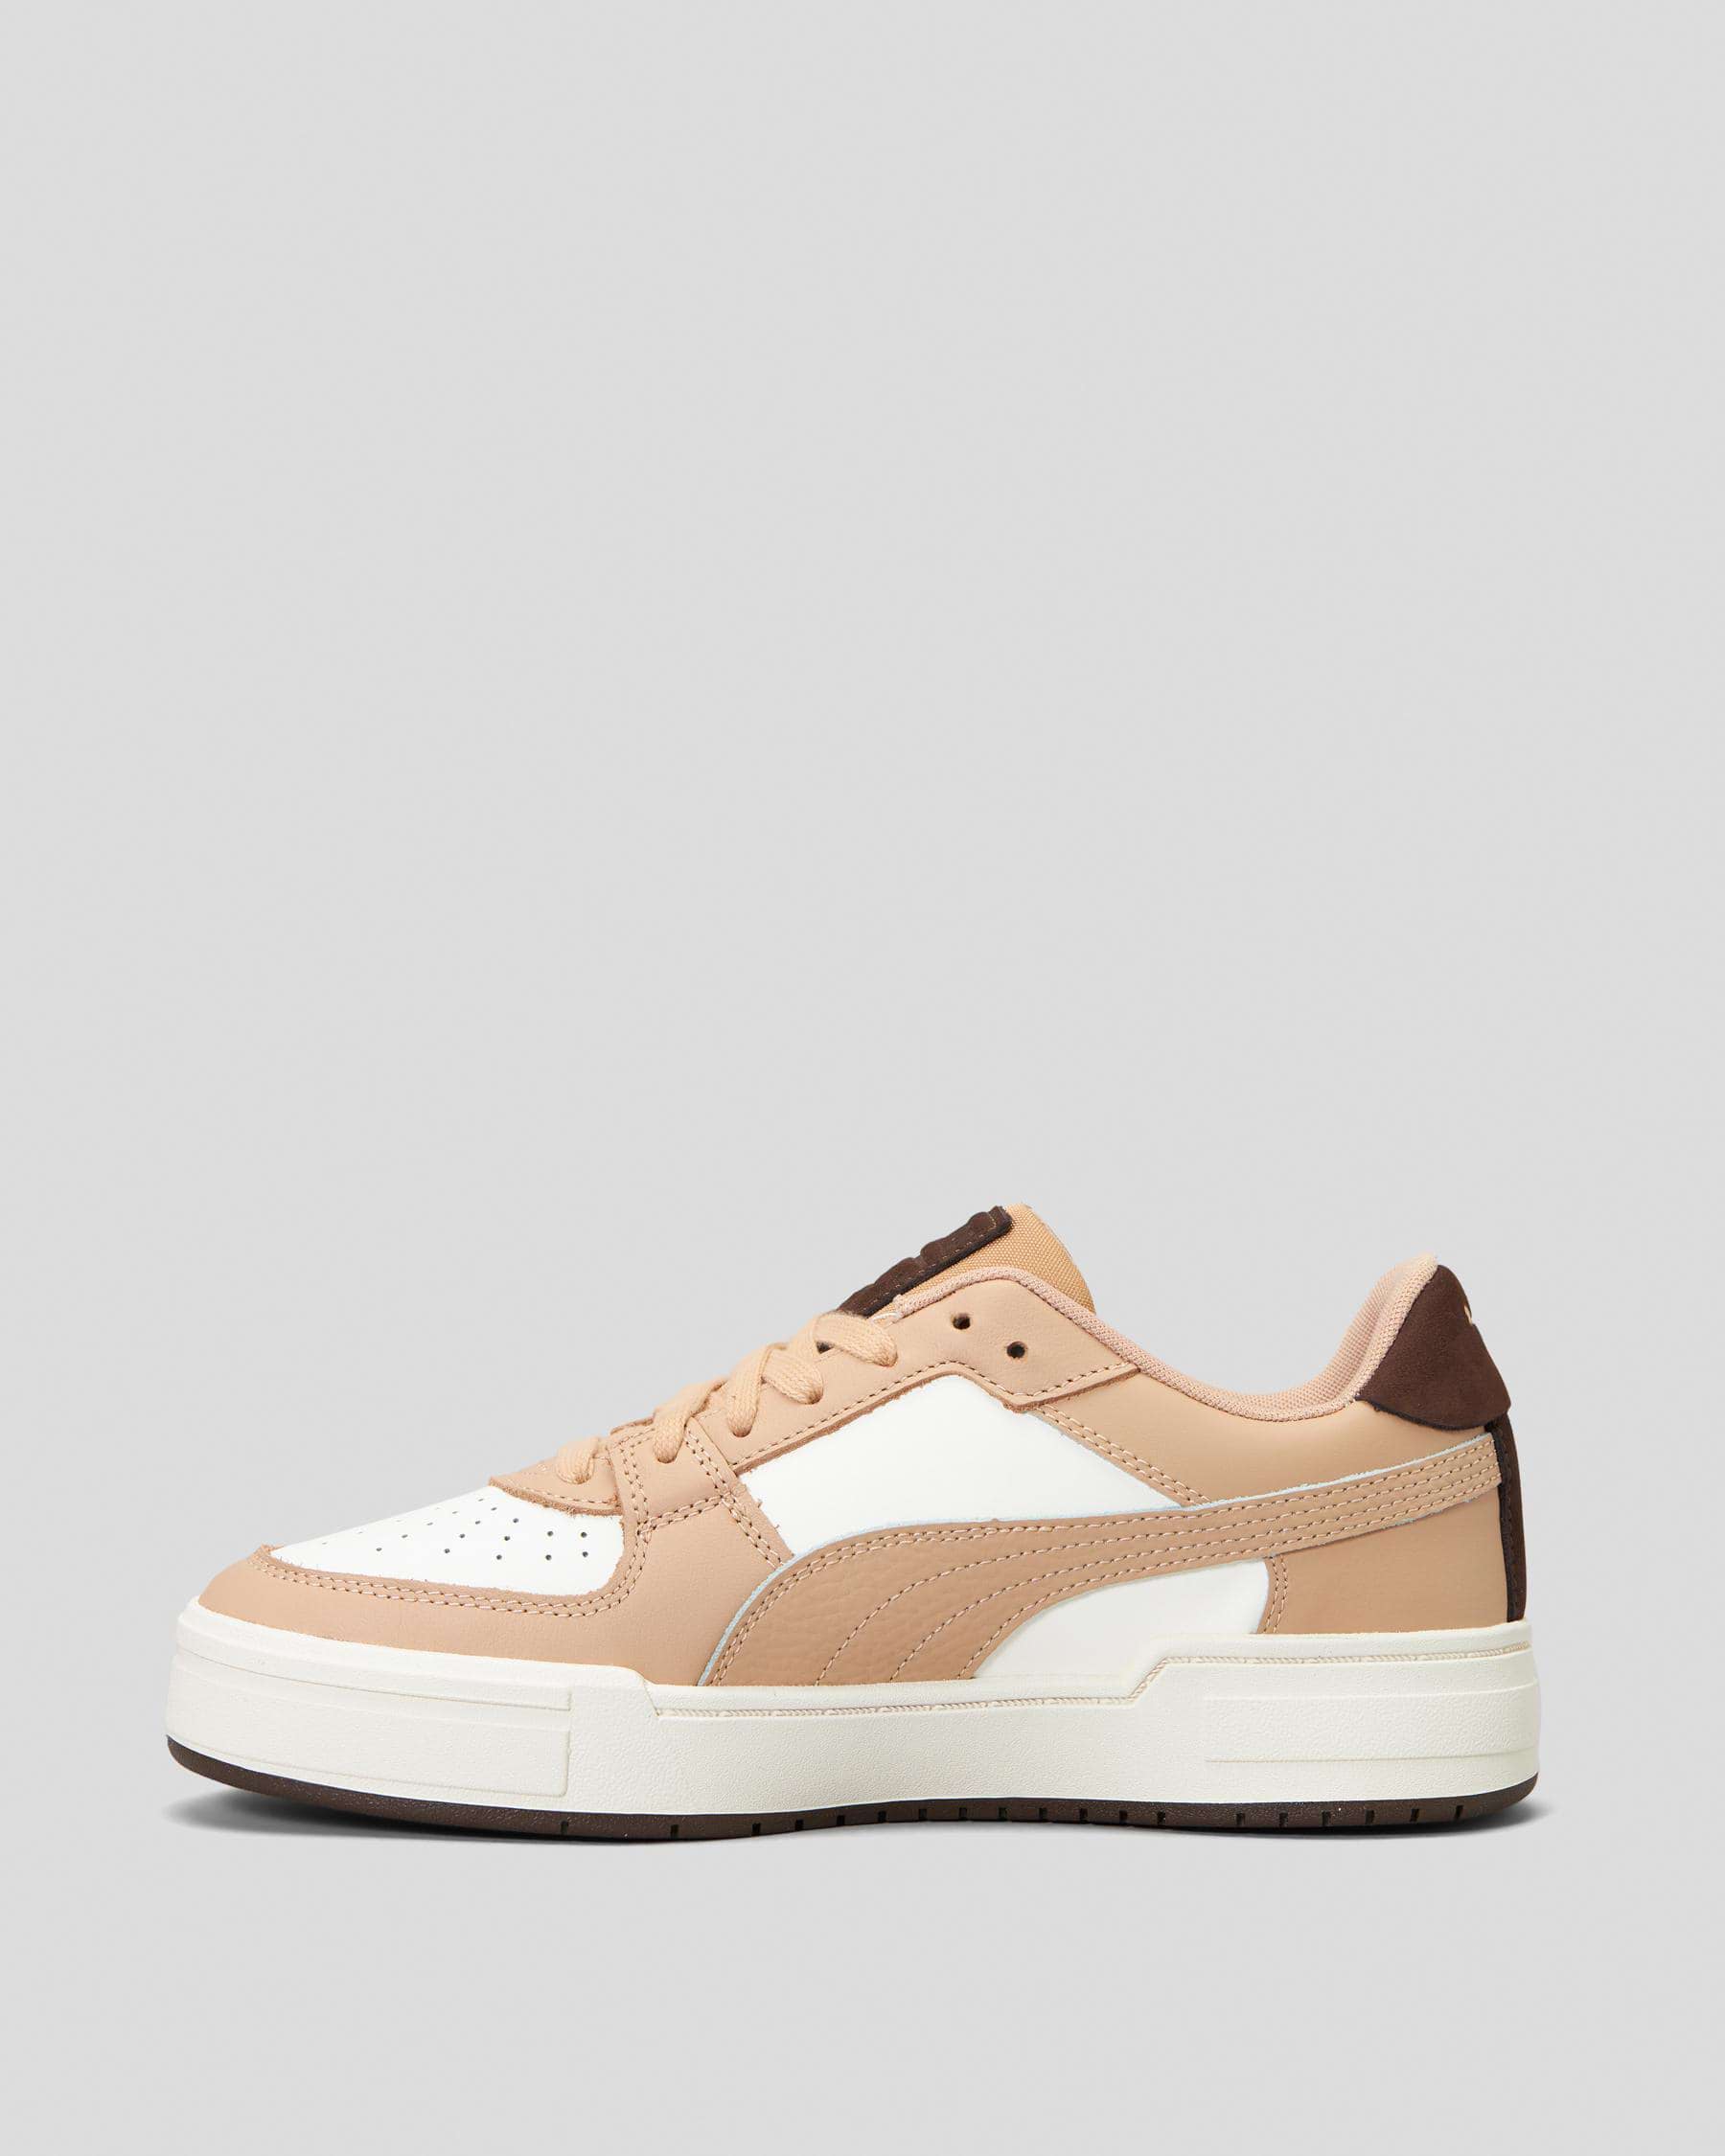 Puma Womens CA Pro lth Mix Shoes In Warm White/dusty Tan/chocolate ...